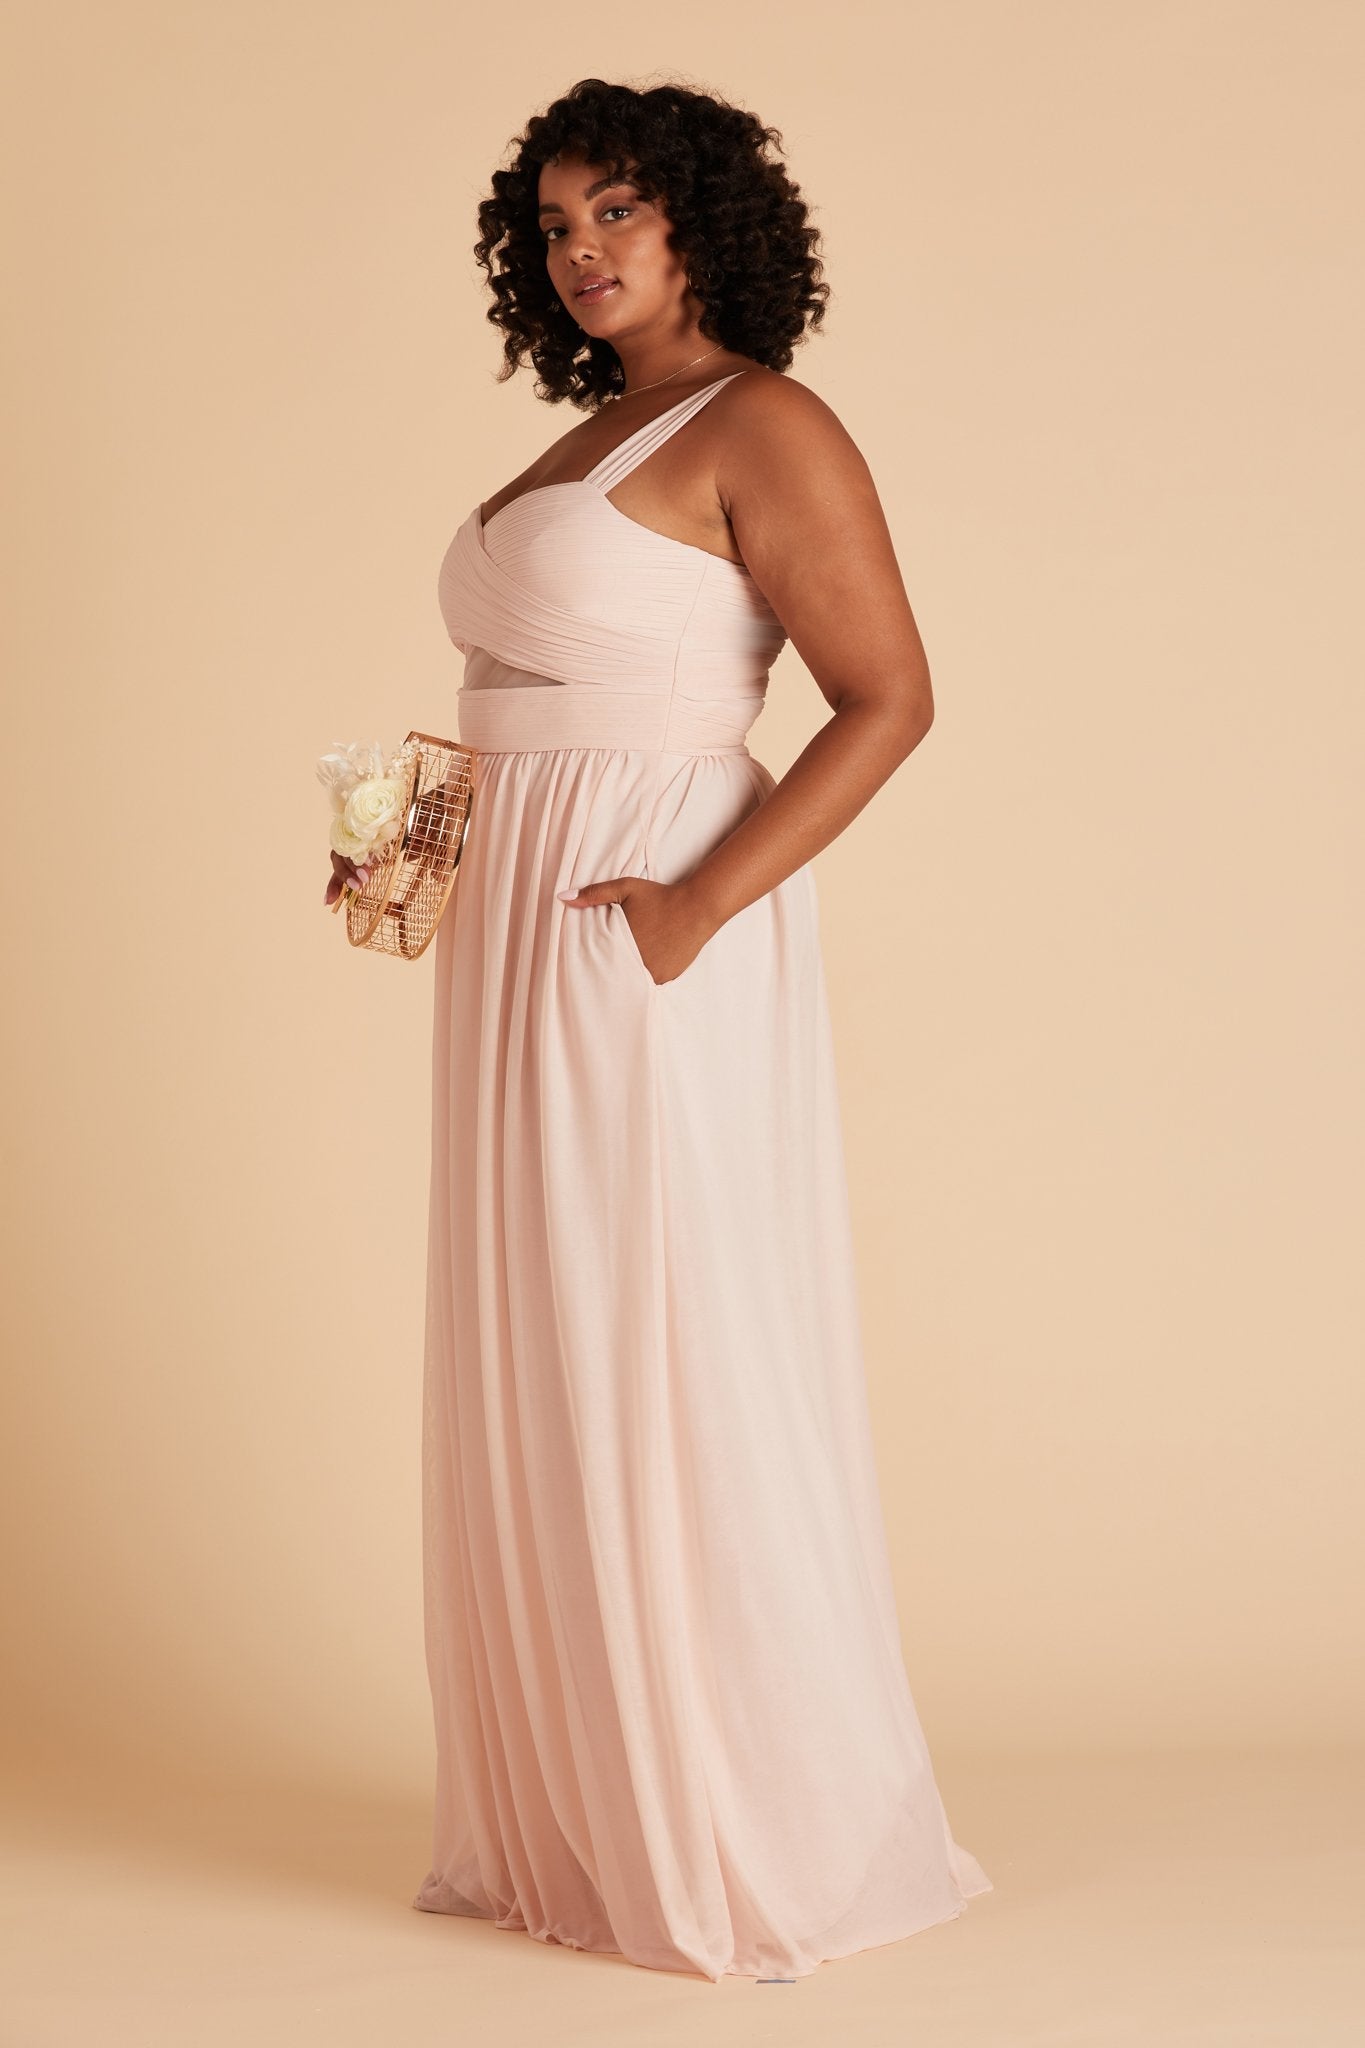 Elsye plus size bridesmaid dress in pale blush chiffon by Birdy Grey, side view with hand in pocket